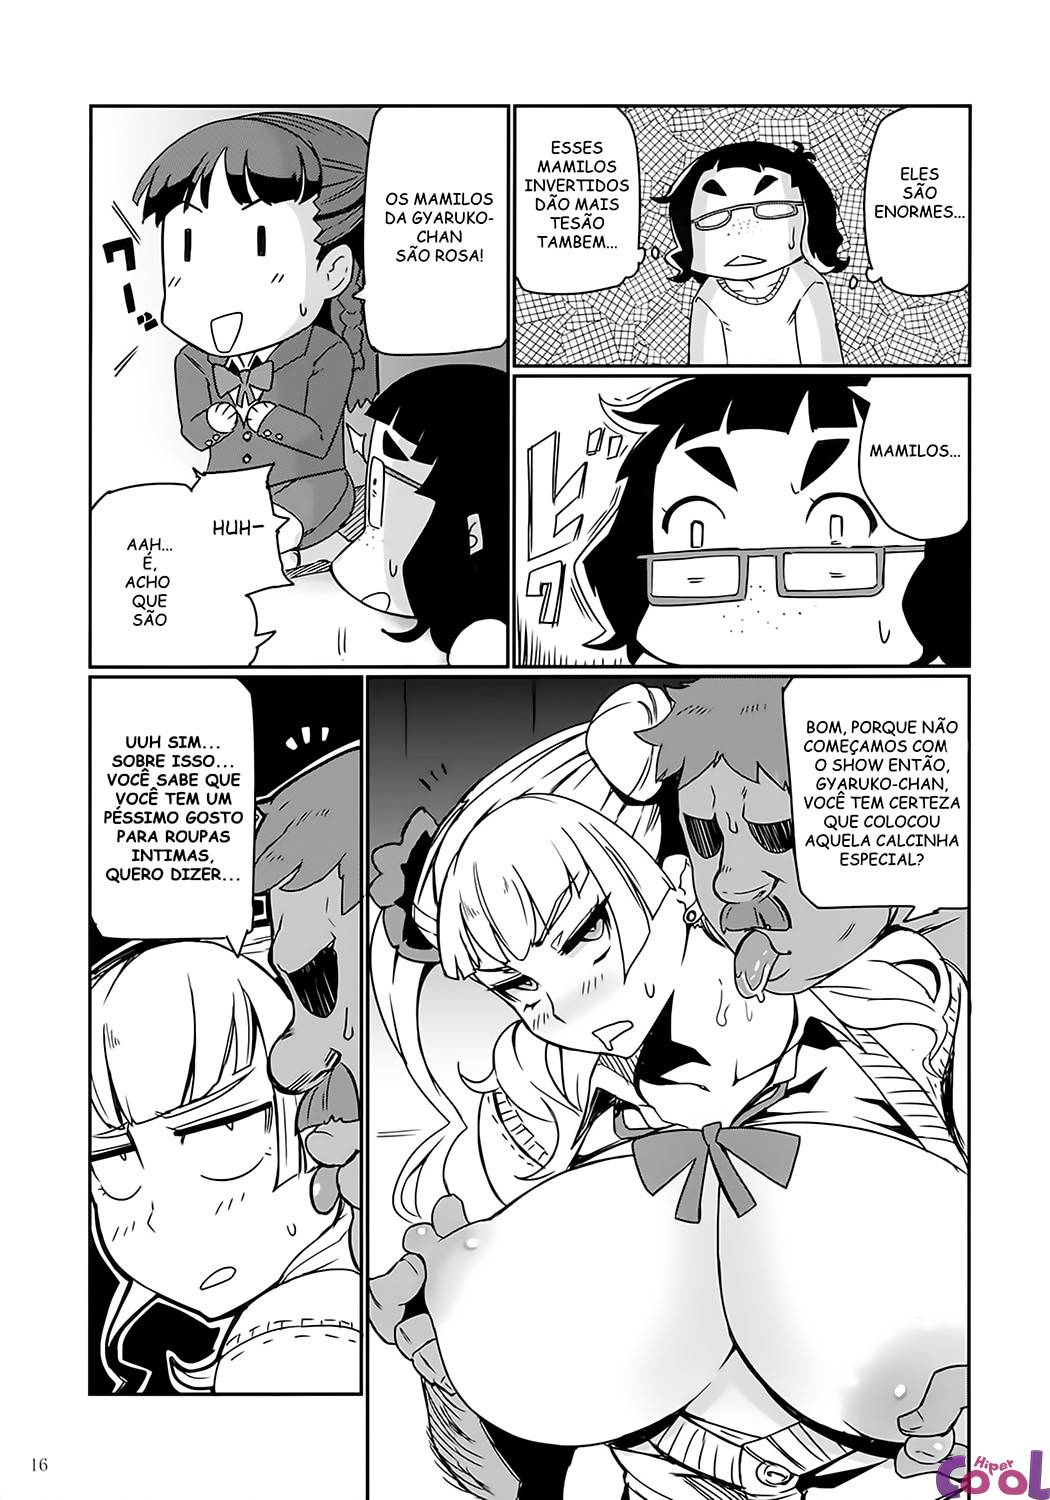 galko-ah--chapter-01-page-15.jpg